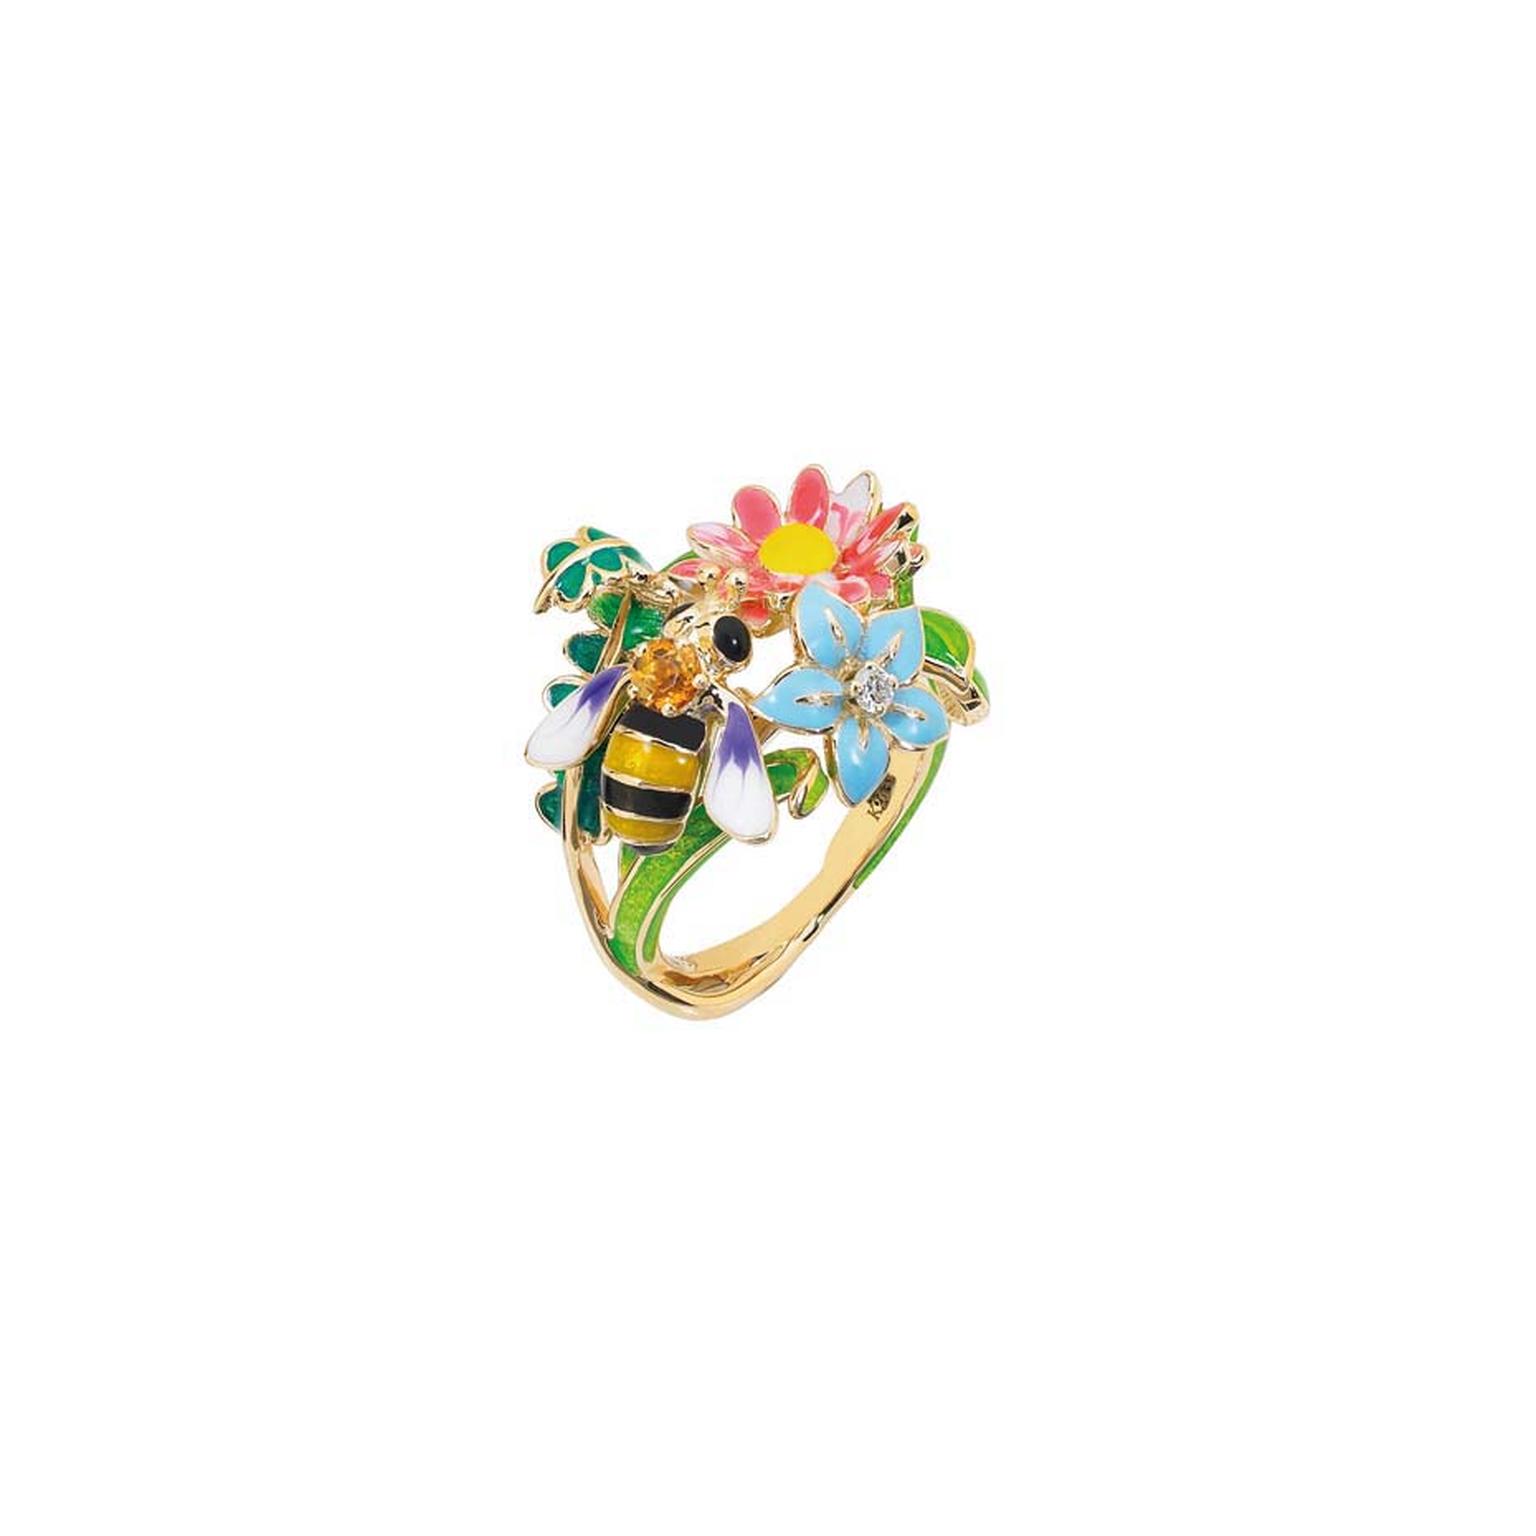 Dior Joaillerie's bee-inspired Diorette ring in yellow gold with diamond and lacquer.